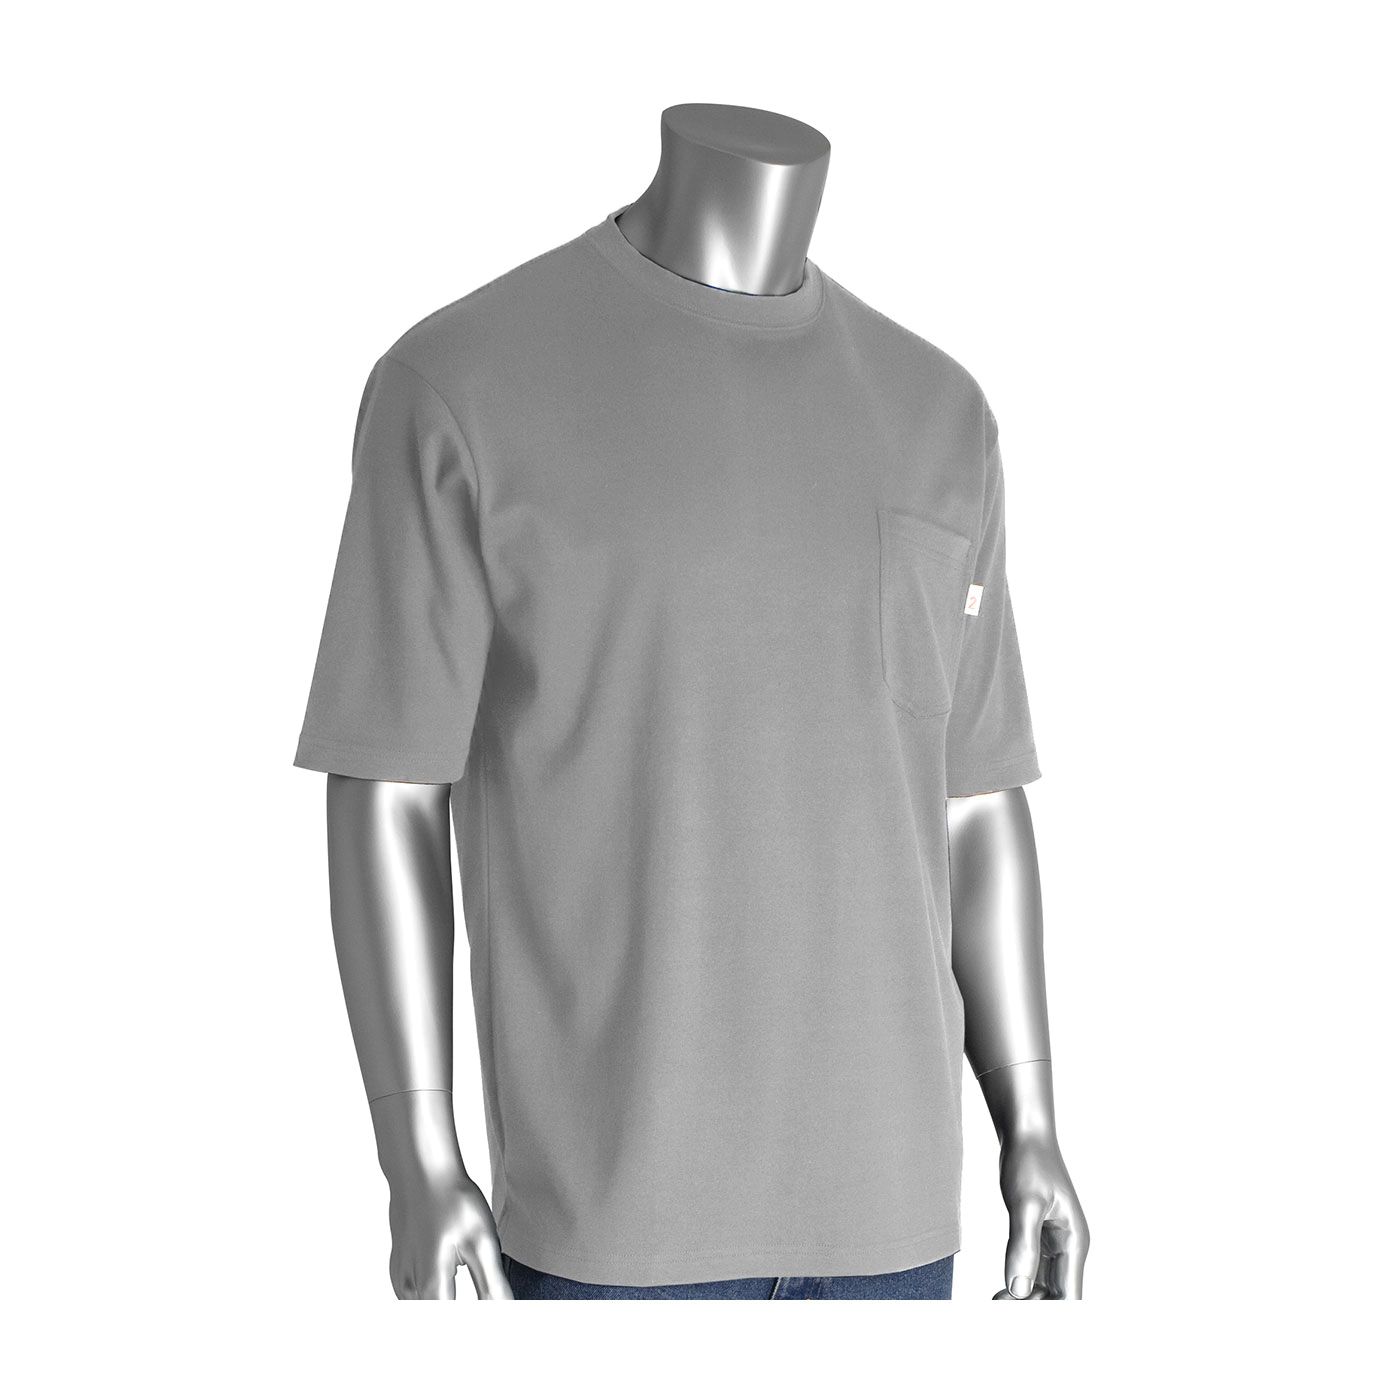 PIP® 385-FRSS-LG/2X Arc and Flame-Resistant Short Sleeve T-Shirt, 2XL, Light Gray, Cotton Interlock Knit, 33-1/2 in L